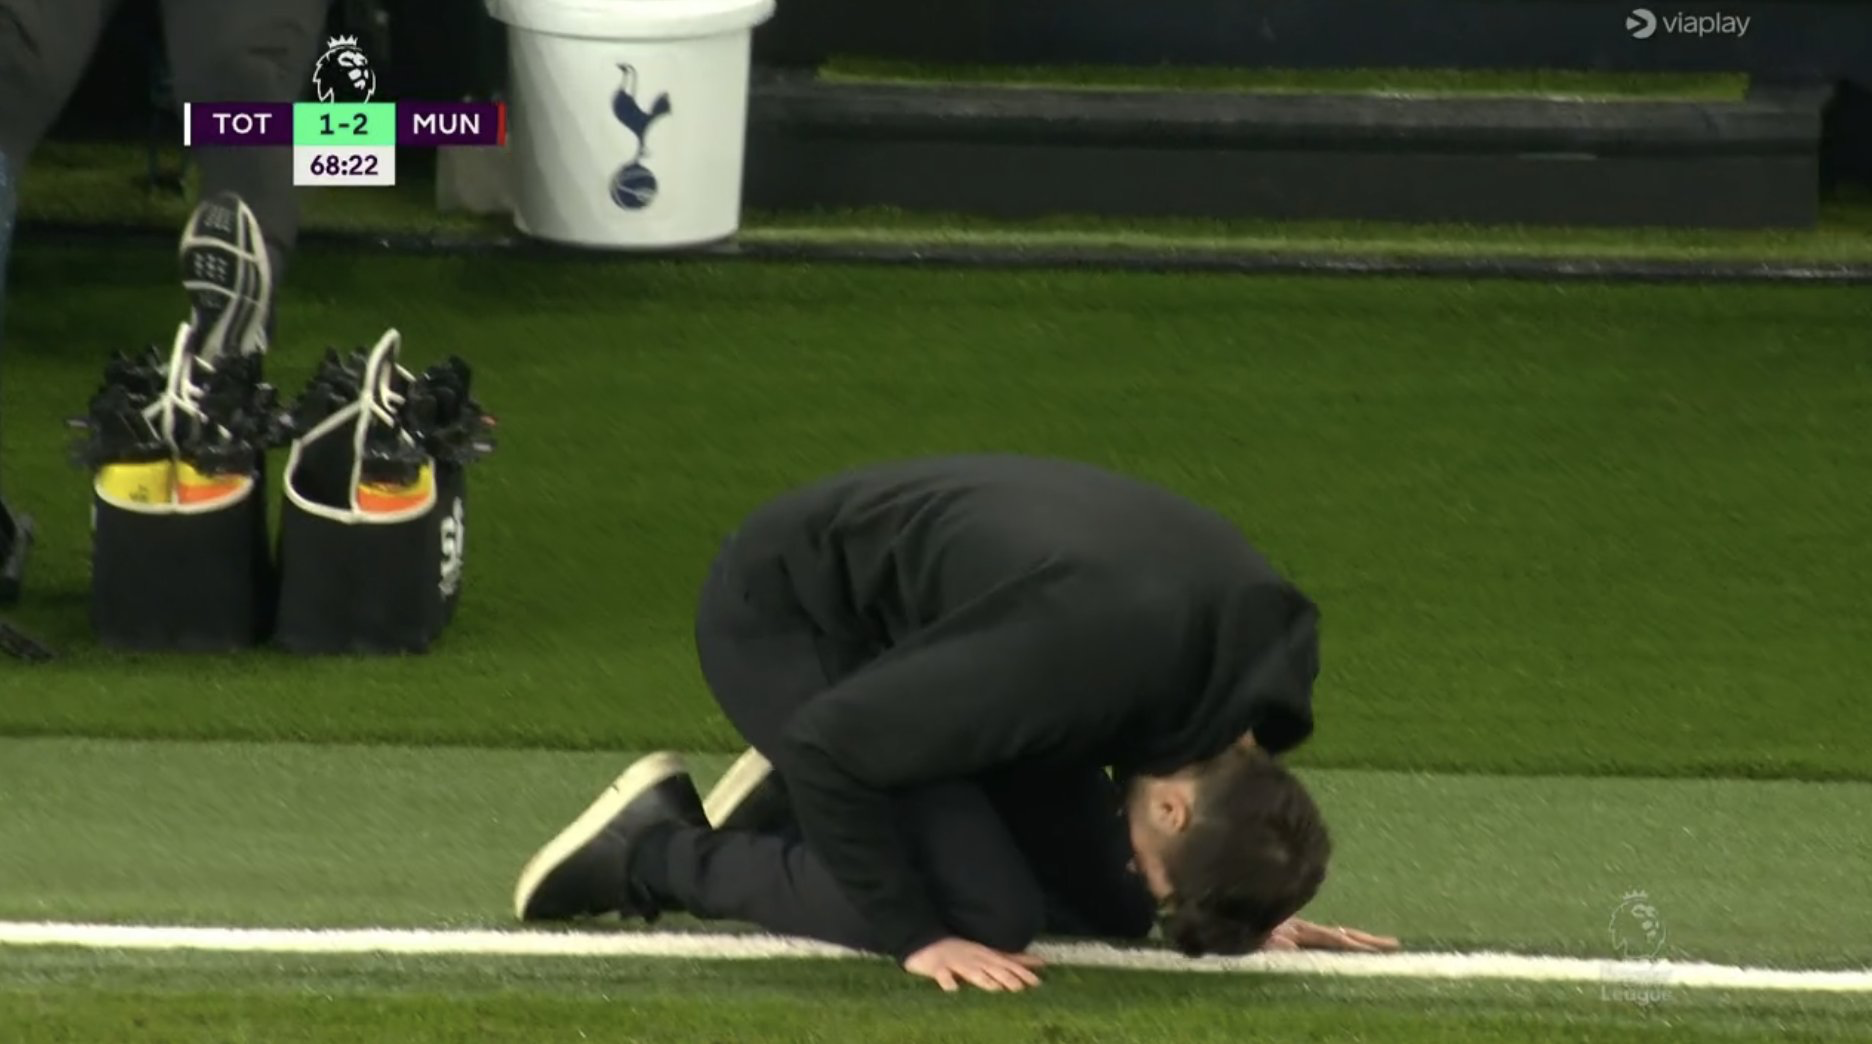 Ryan Mason prostrating in frustration after Eric Dier missed a shot against Manchester United.